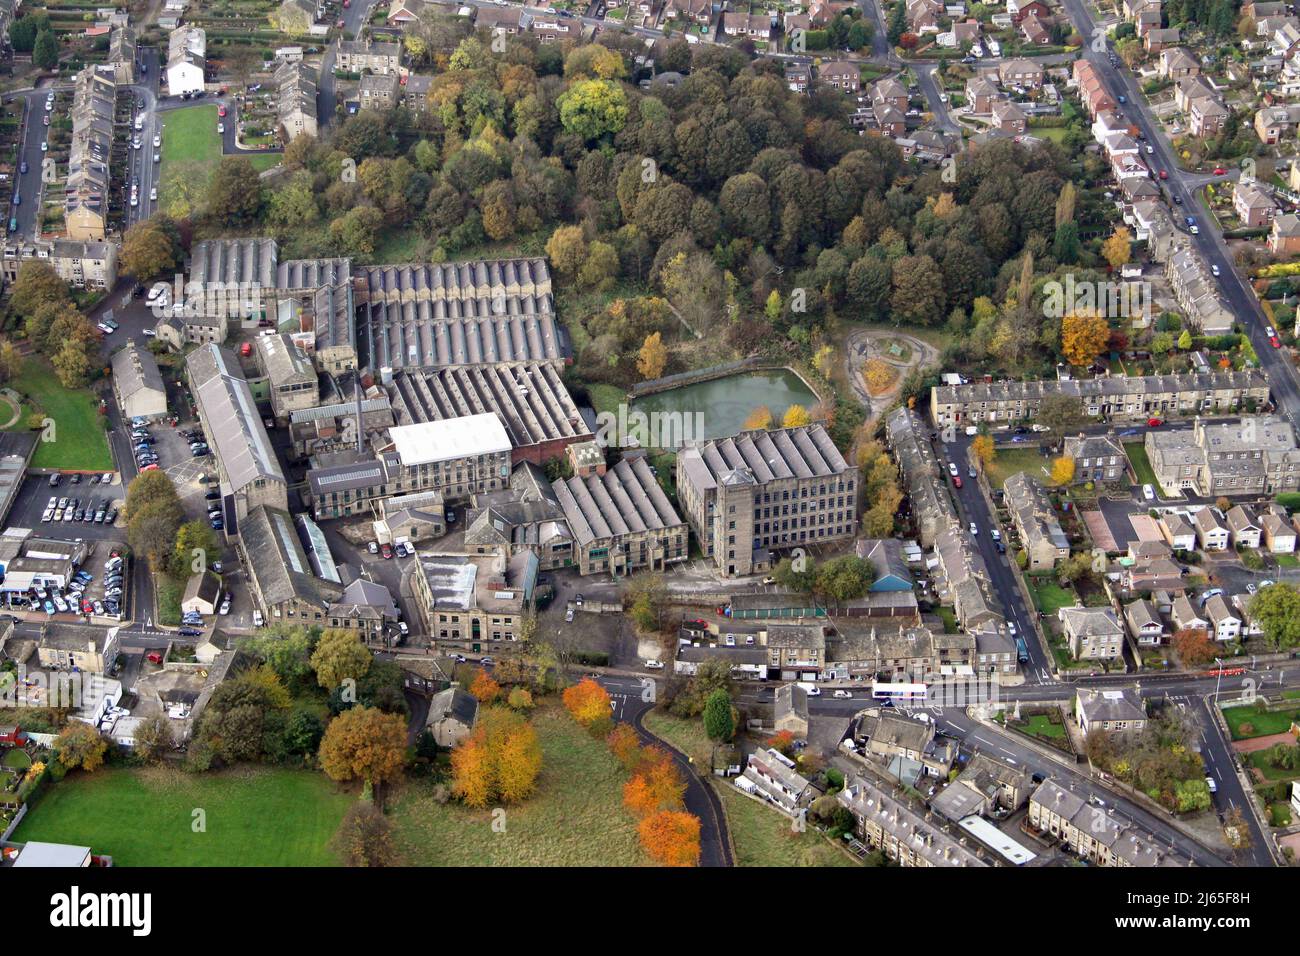 Aerial view of Sunny Bank Mills in Farsley, Leeds, West Yorkshire. Home to 'The Great British Sewing Bee' BBC TV programme. Stock Photo